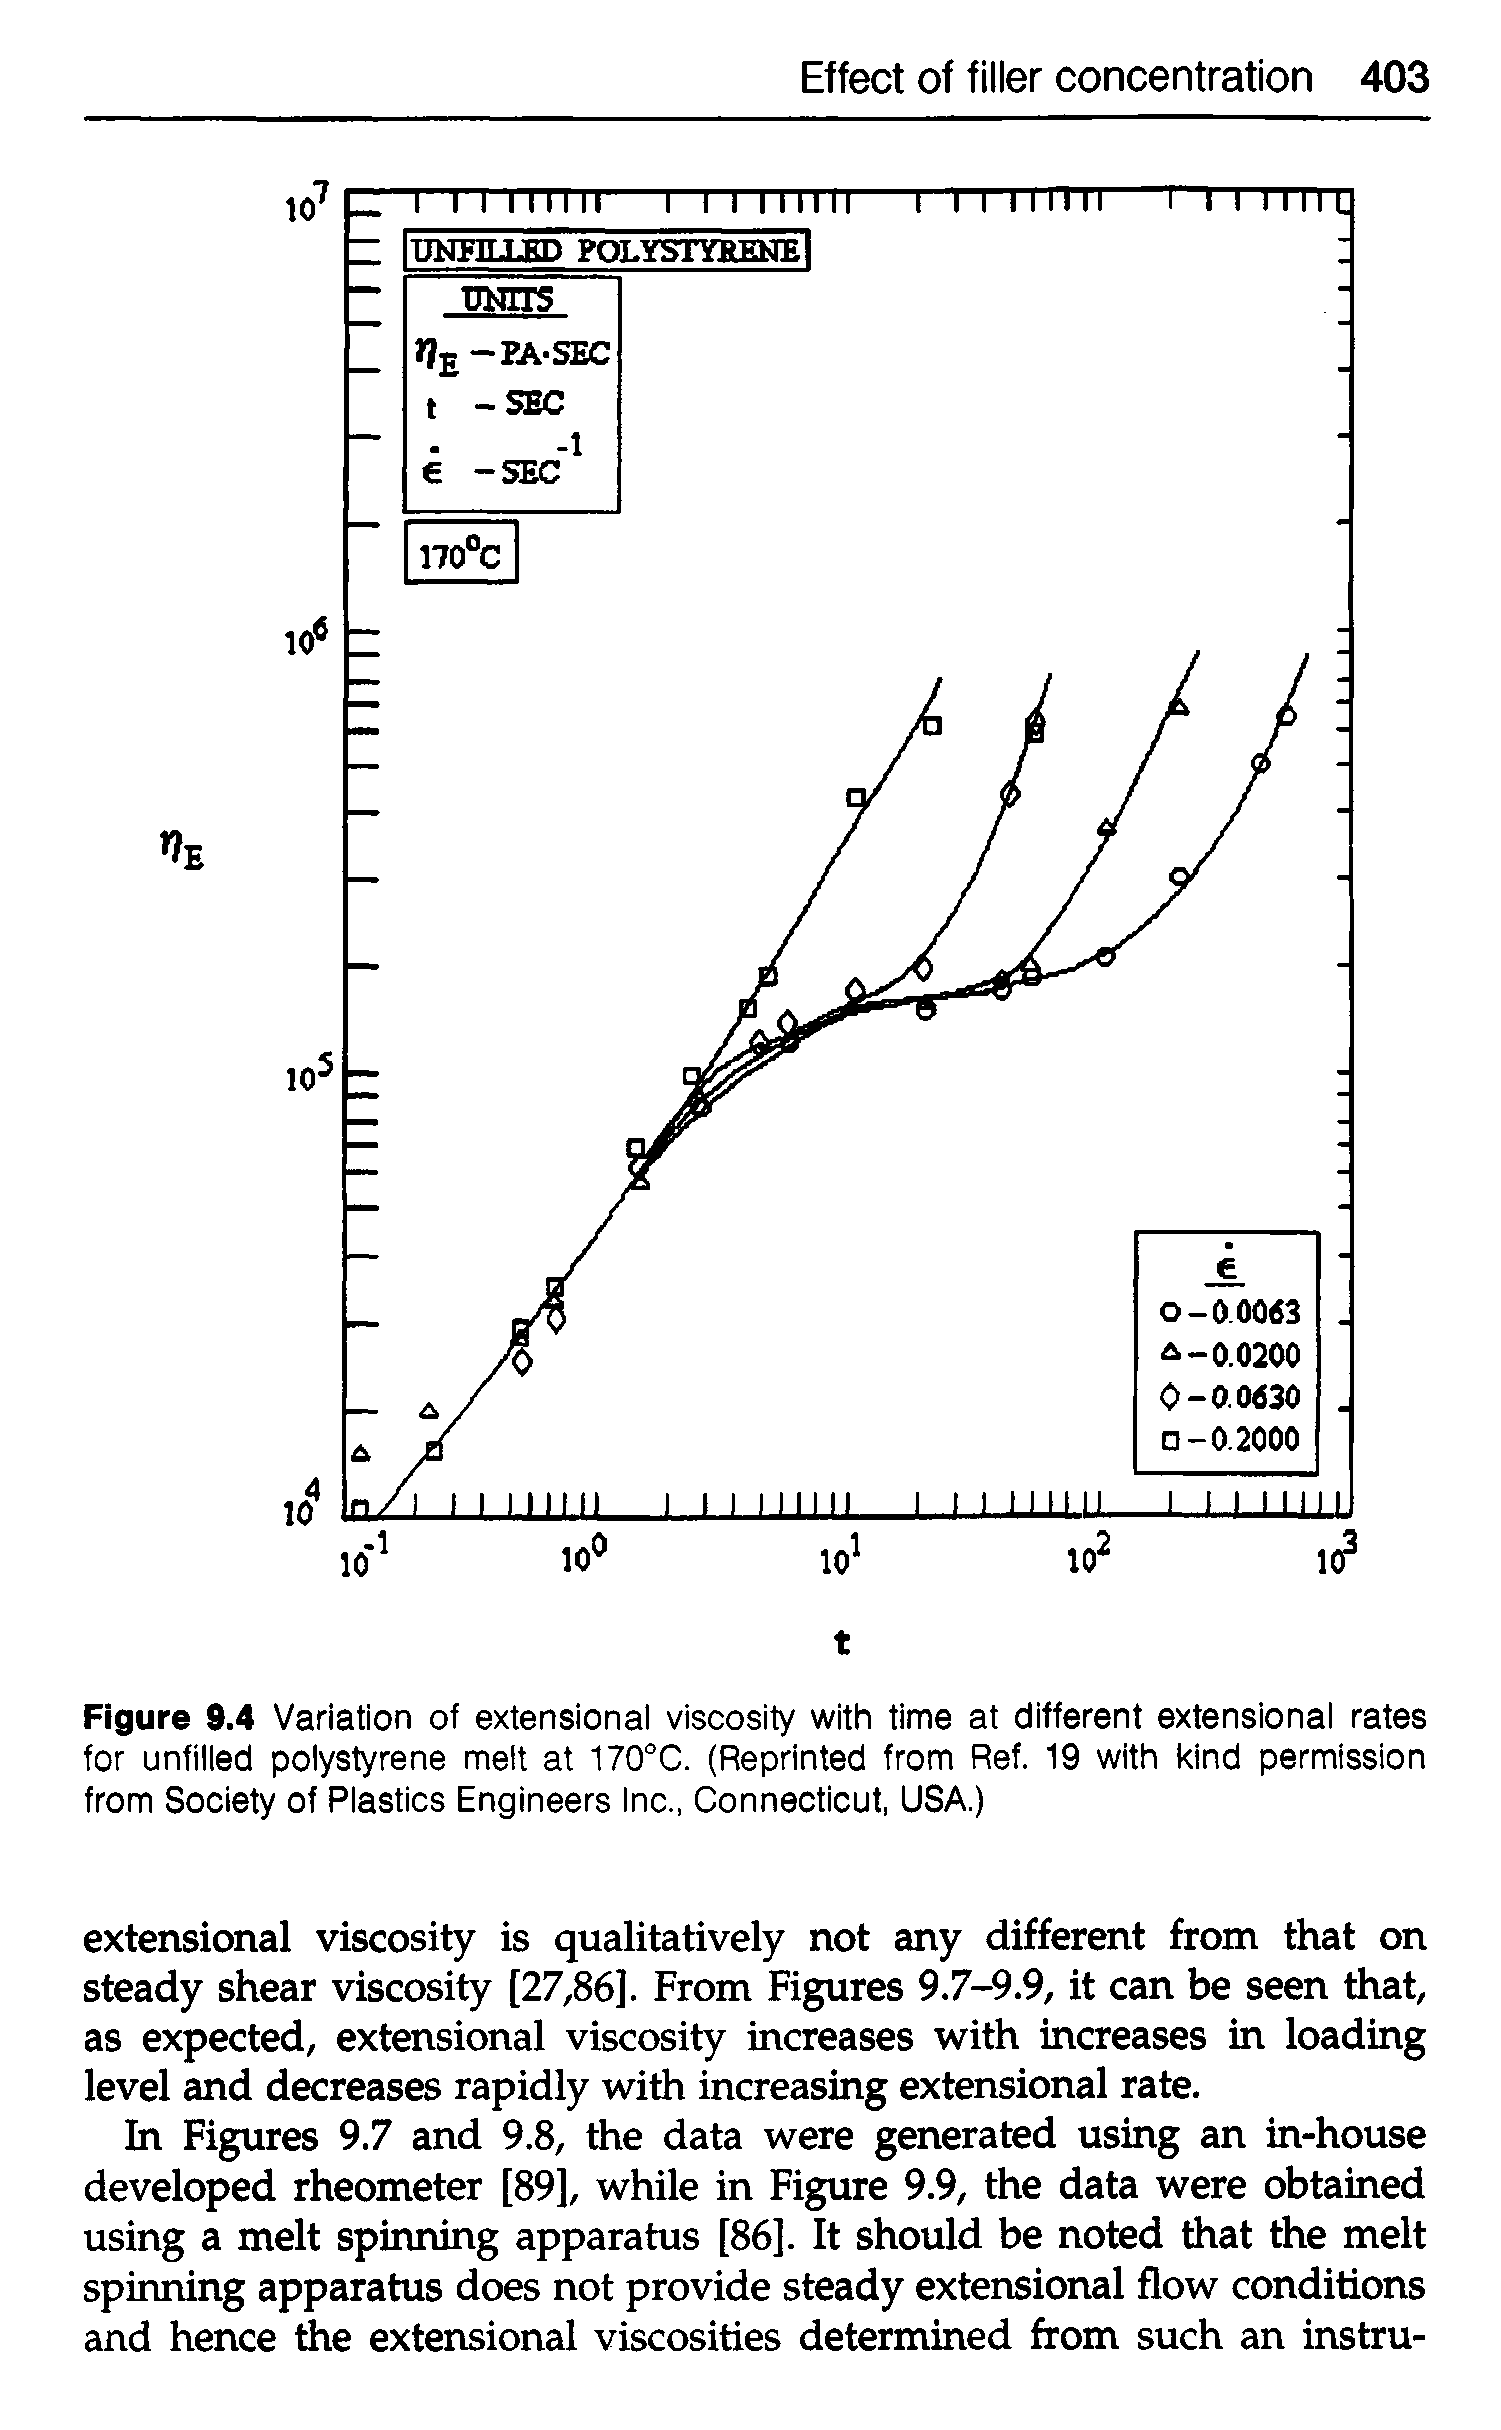 Figure 9.4 Variation of extensionai viscosity with time at different extensionai rates for unfilled polystyrene melt at 170°C. (Reprinted from Ref. 19 with kind permission from Society of Plastics Engineers Inc., Connecticut, USA.)...